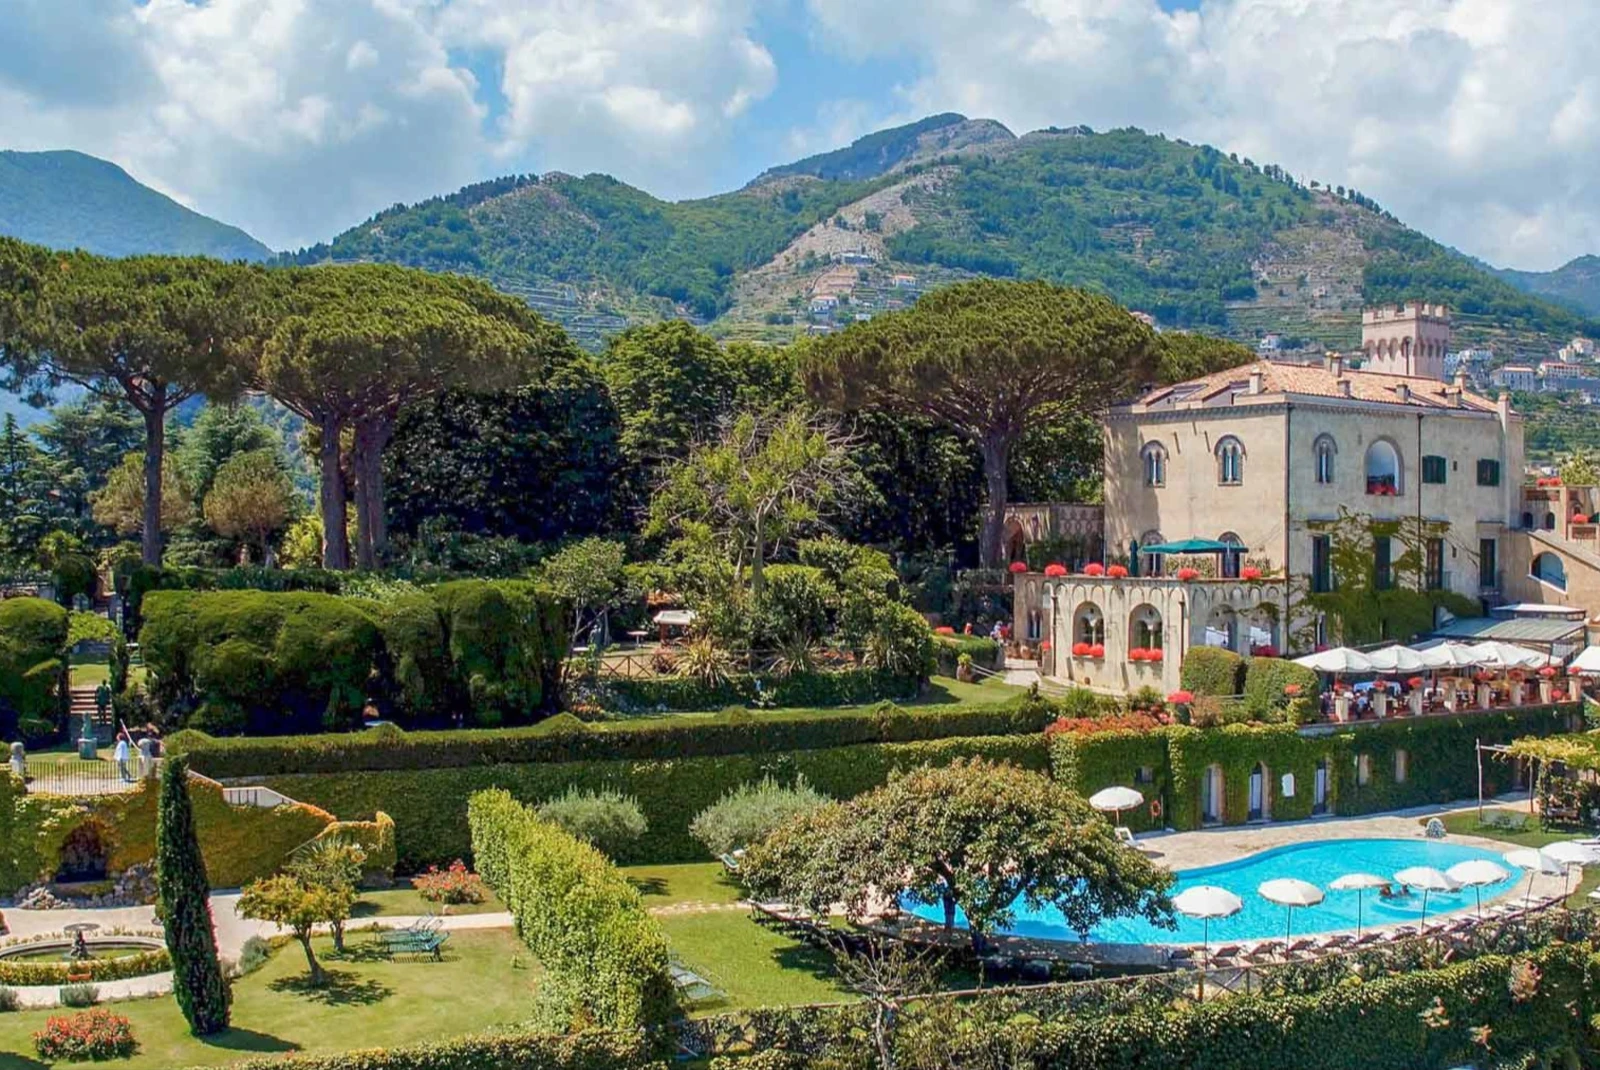 Villa Cimbrone Gardens is a breathtaking Italian oasis perched atop the Amalfi Coast, adorned with exquisite sculptures and offering panoramic vistas of the Mediterranean.